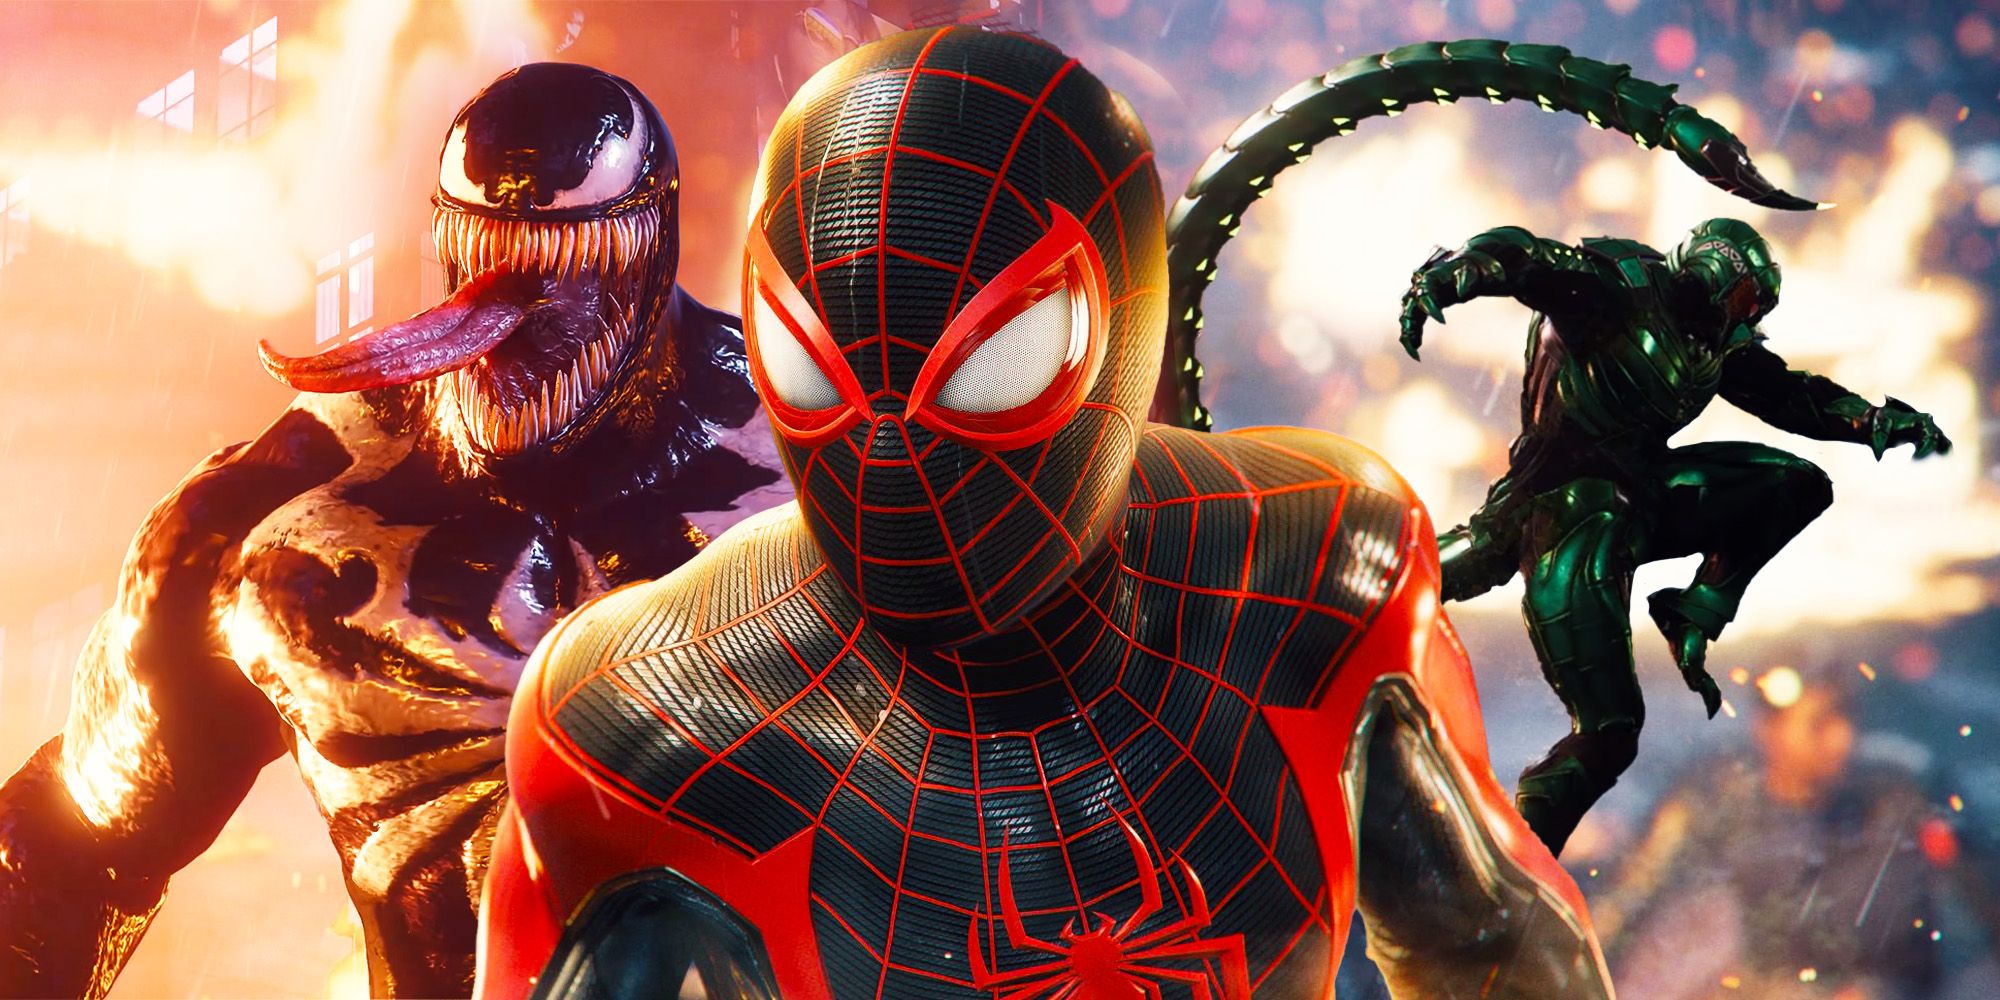 One of Spider-Man 2's biggest spoilers arrives courtesy of PlayStation